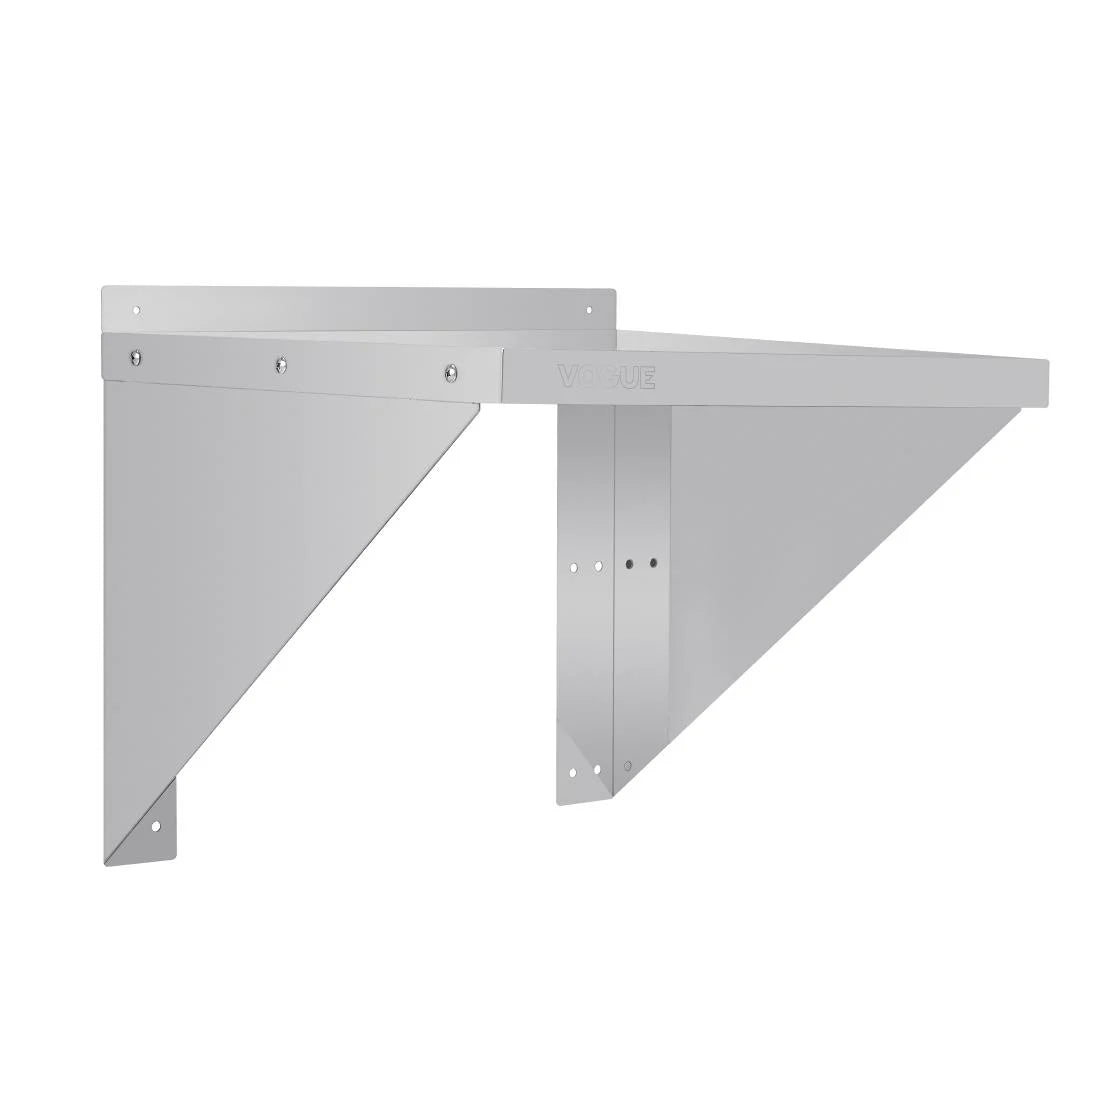 Vogue Stainless Steel Microwave Shelf Large.Product Ref:00595.Model: CB912. 🚚 1-3 Days Delivery